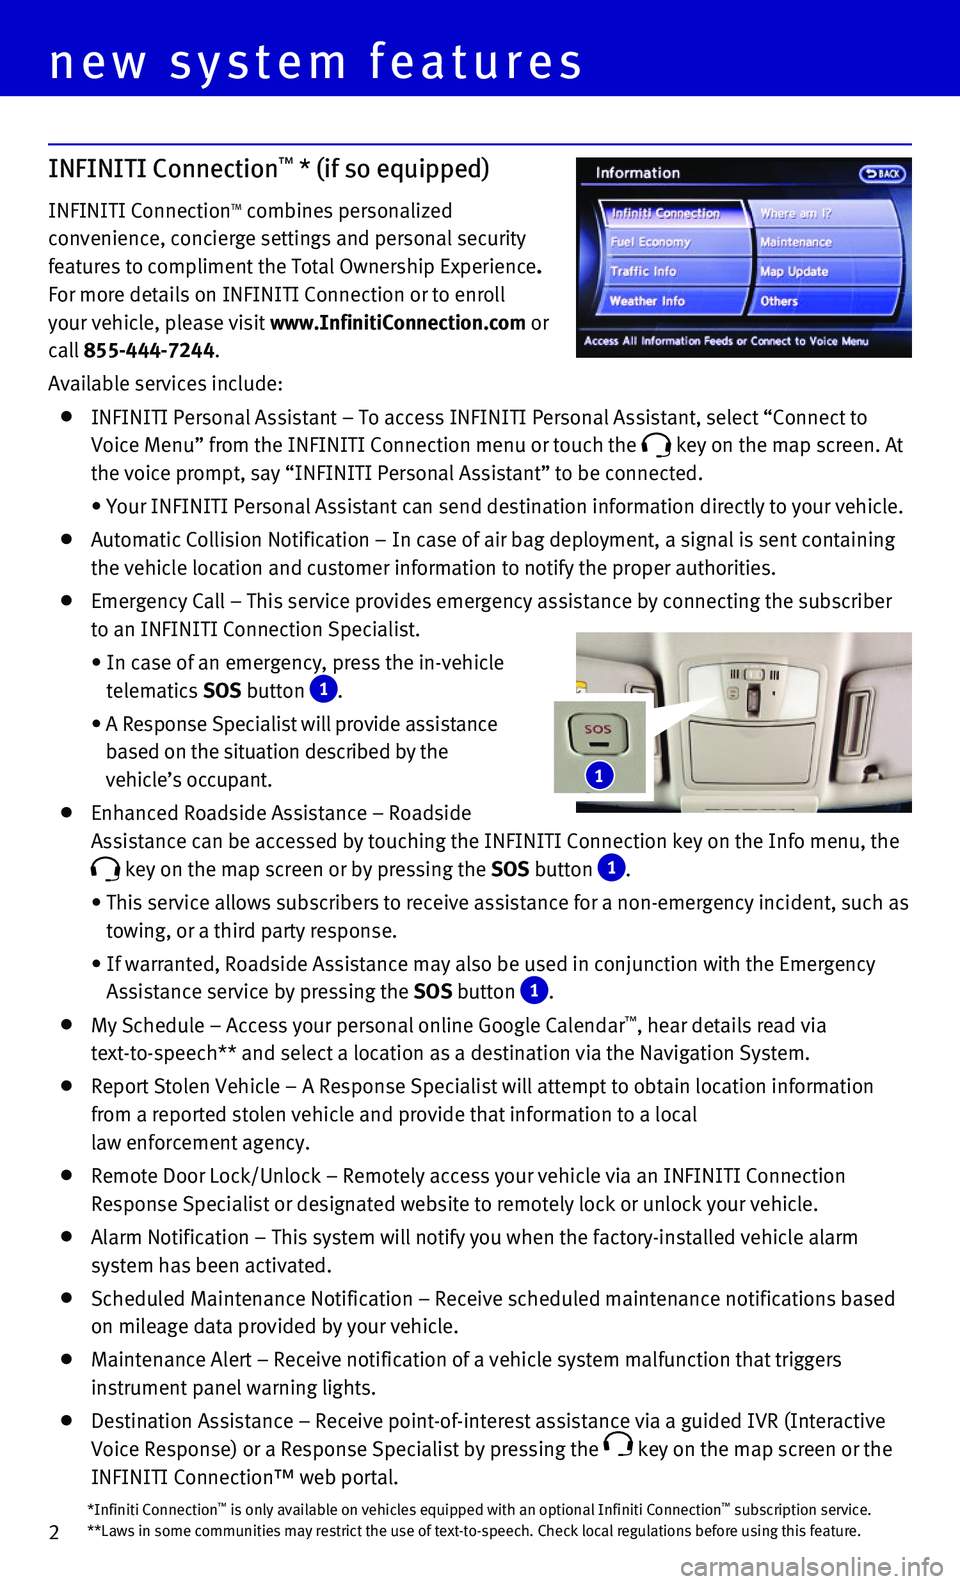 INFINITI QX80 2015  Quick Reference Guide 2*Infiniti Connection™ is only available on vehicles equipped with an optional Infiniti Connec\
tion™ subscription service.**Laws in some communities may restrict the use of text-to-speech. Check\